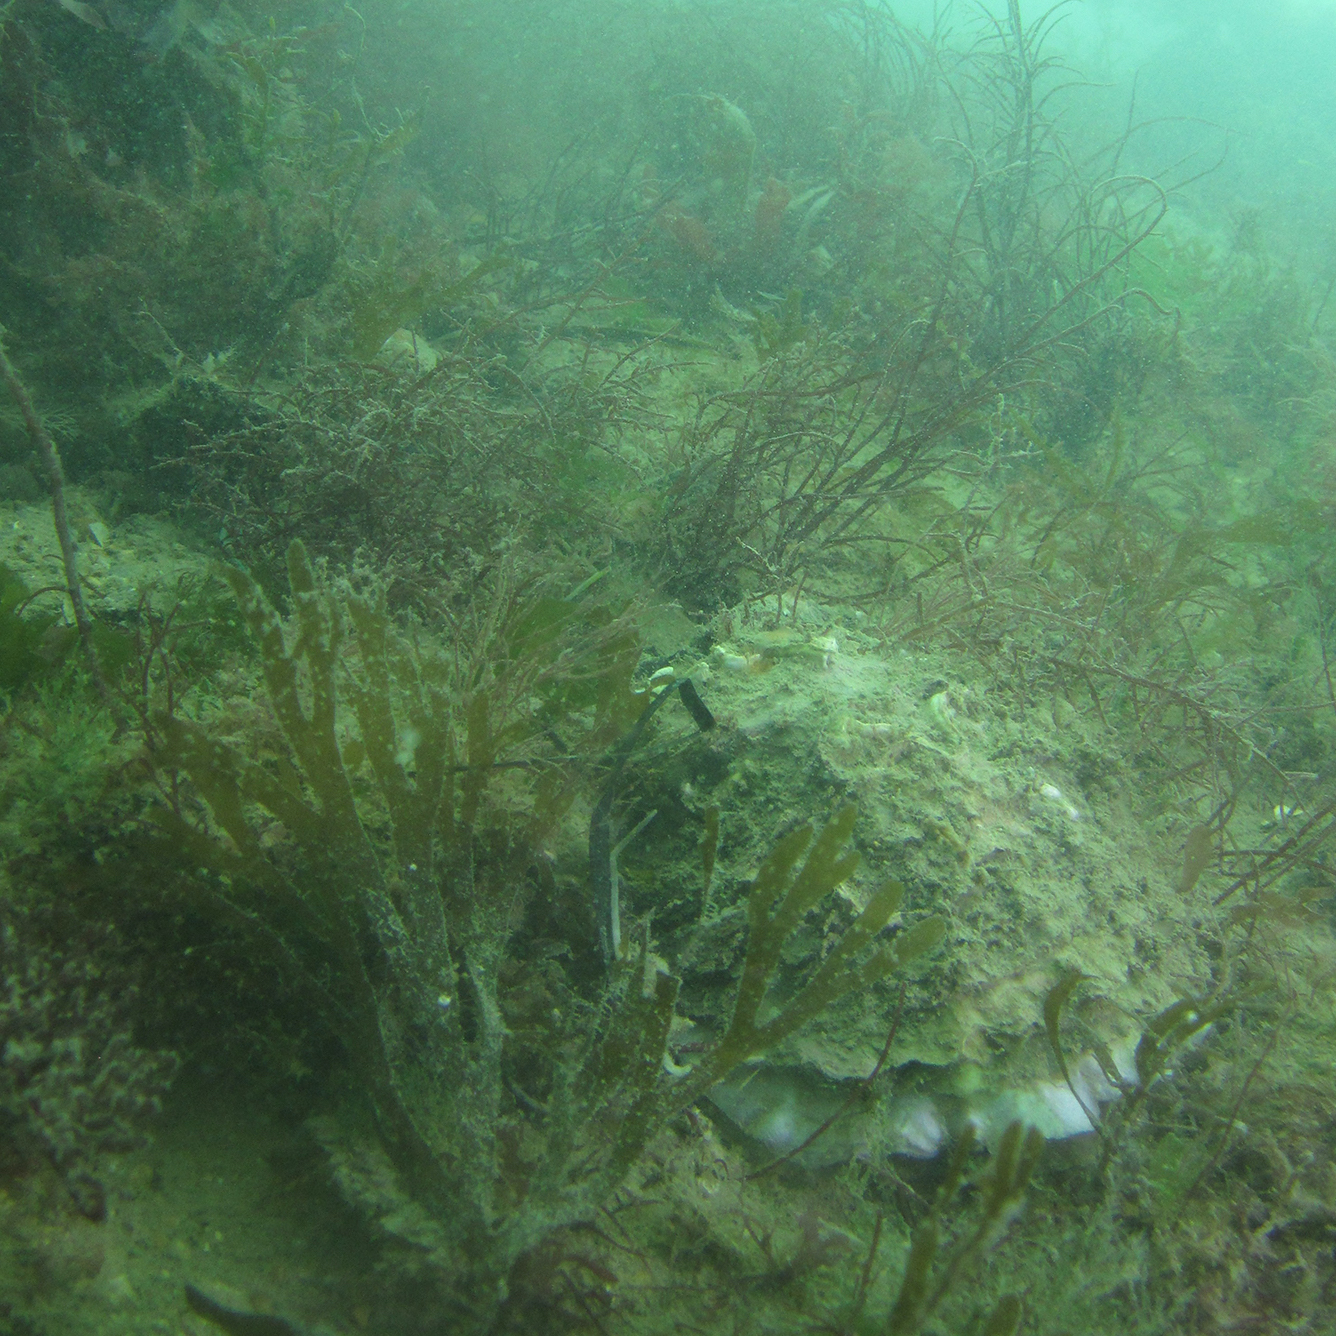 Native oyster amongst seagrass